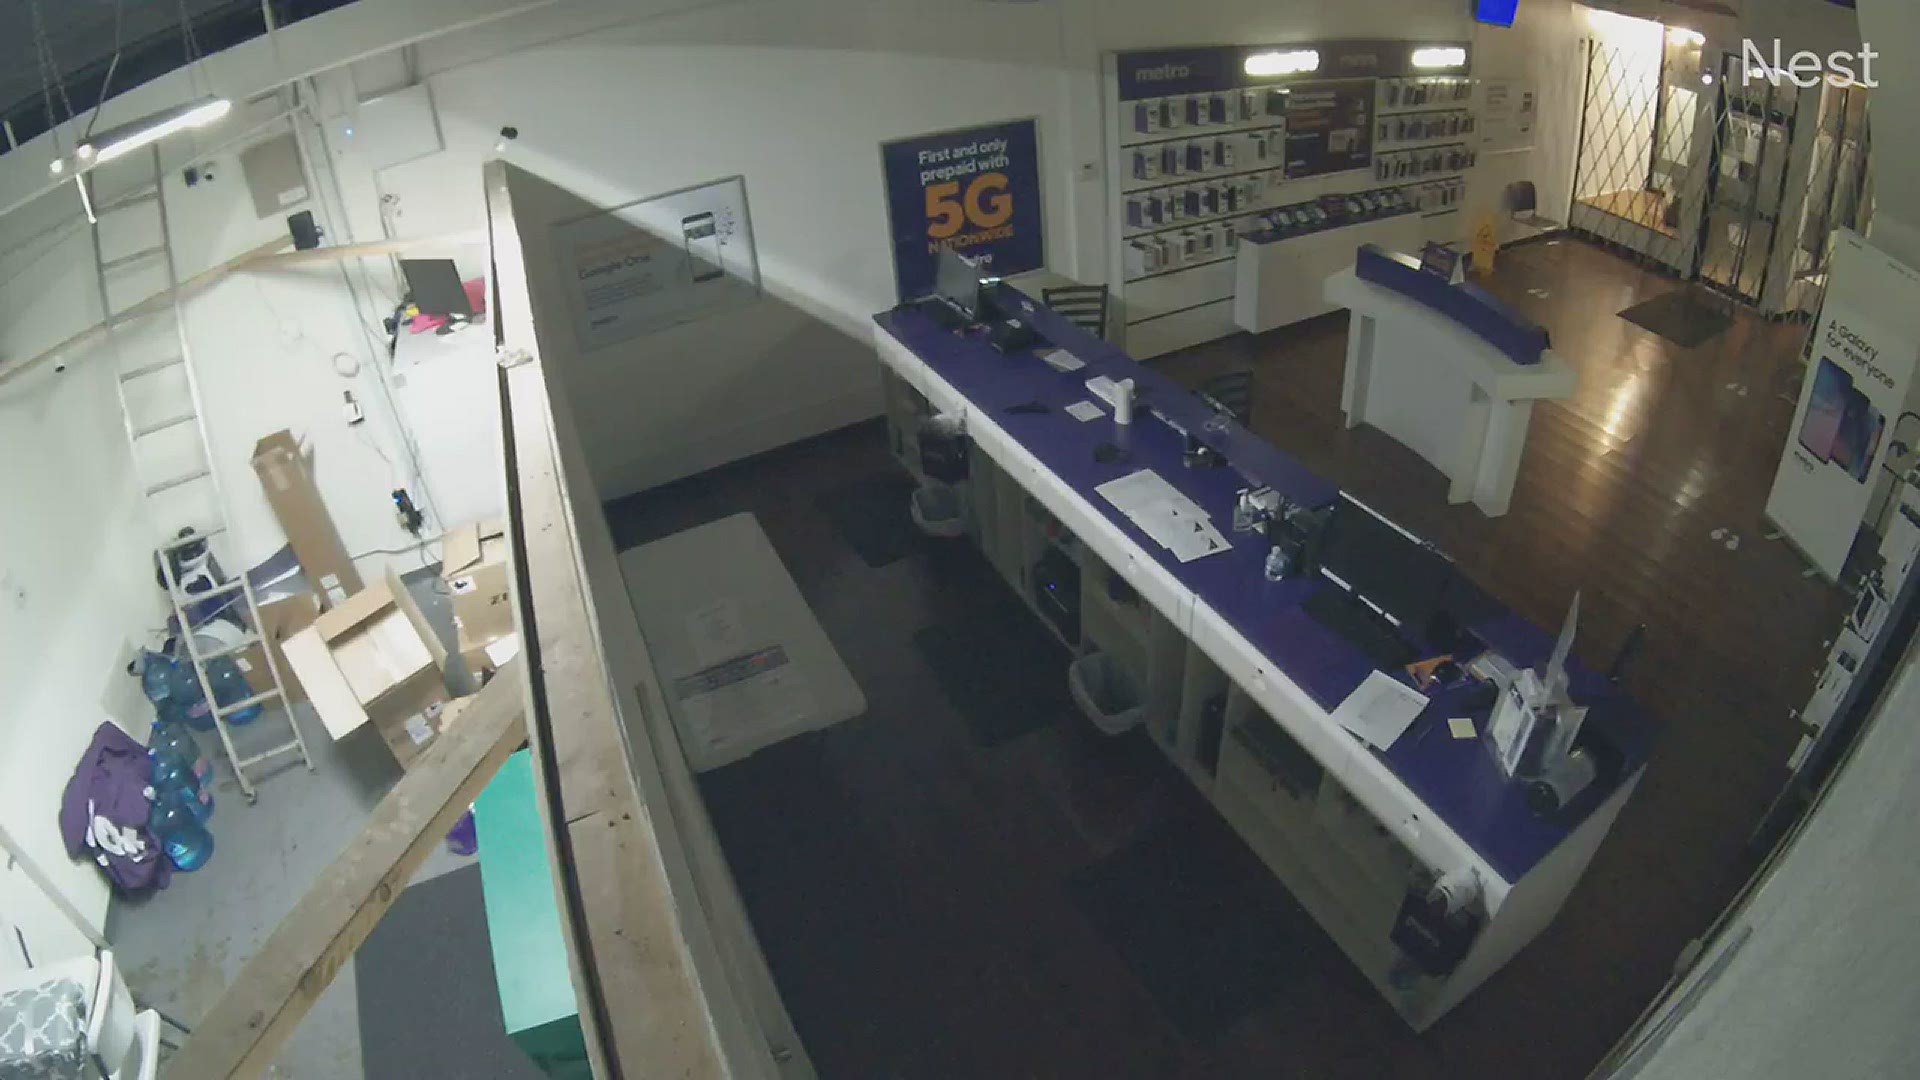 St. Louis police are looking for help identifying four people seen in surveillance video looting a Metro PCS store early Tuesday morning.